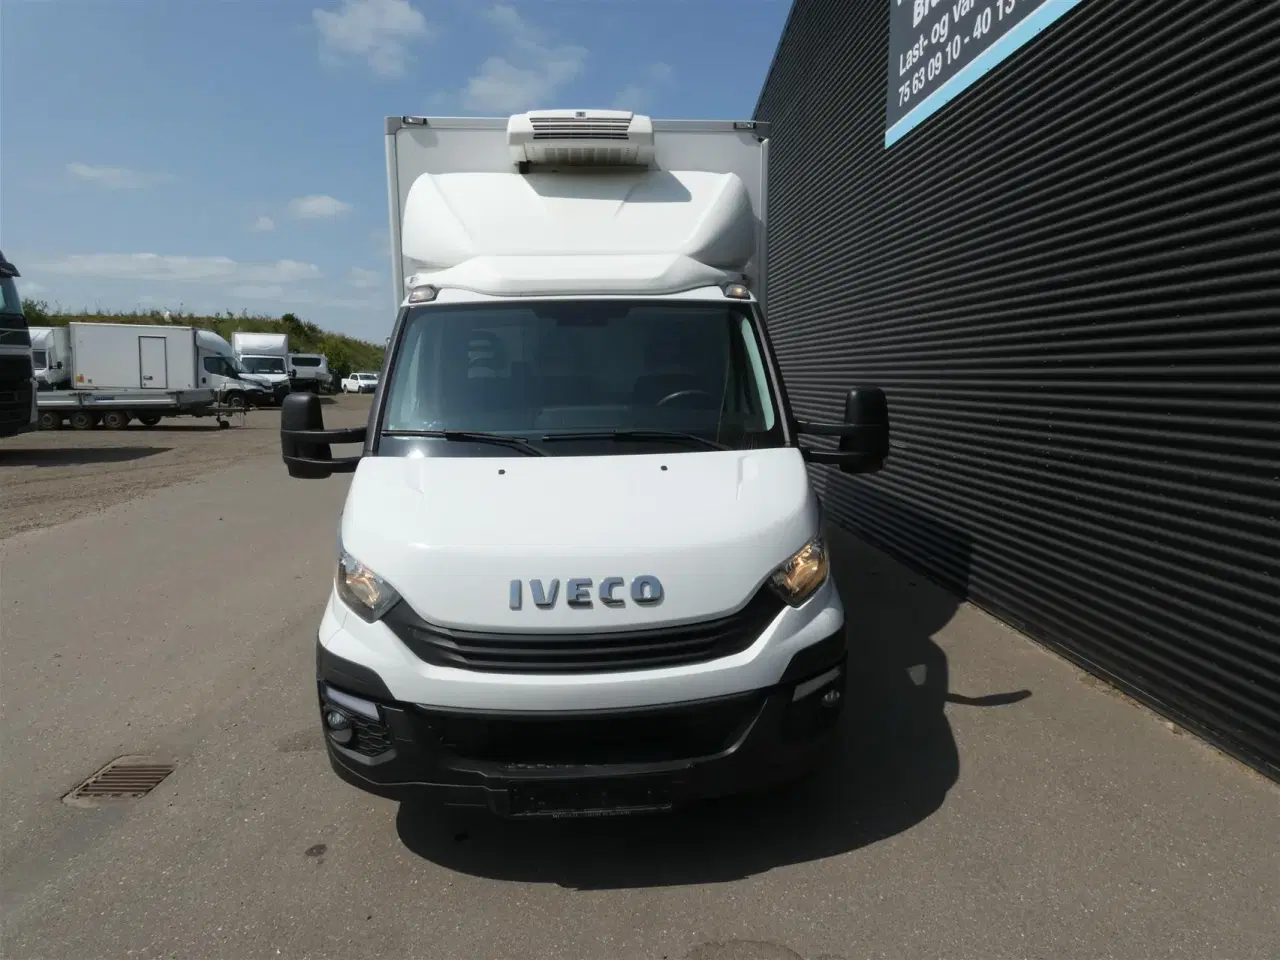 Billede 4 - Iveco Daily 35S18 3750mm 3,0 D 180HK Ladv./Chas. 6g